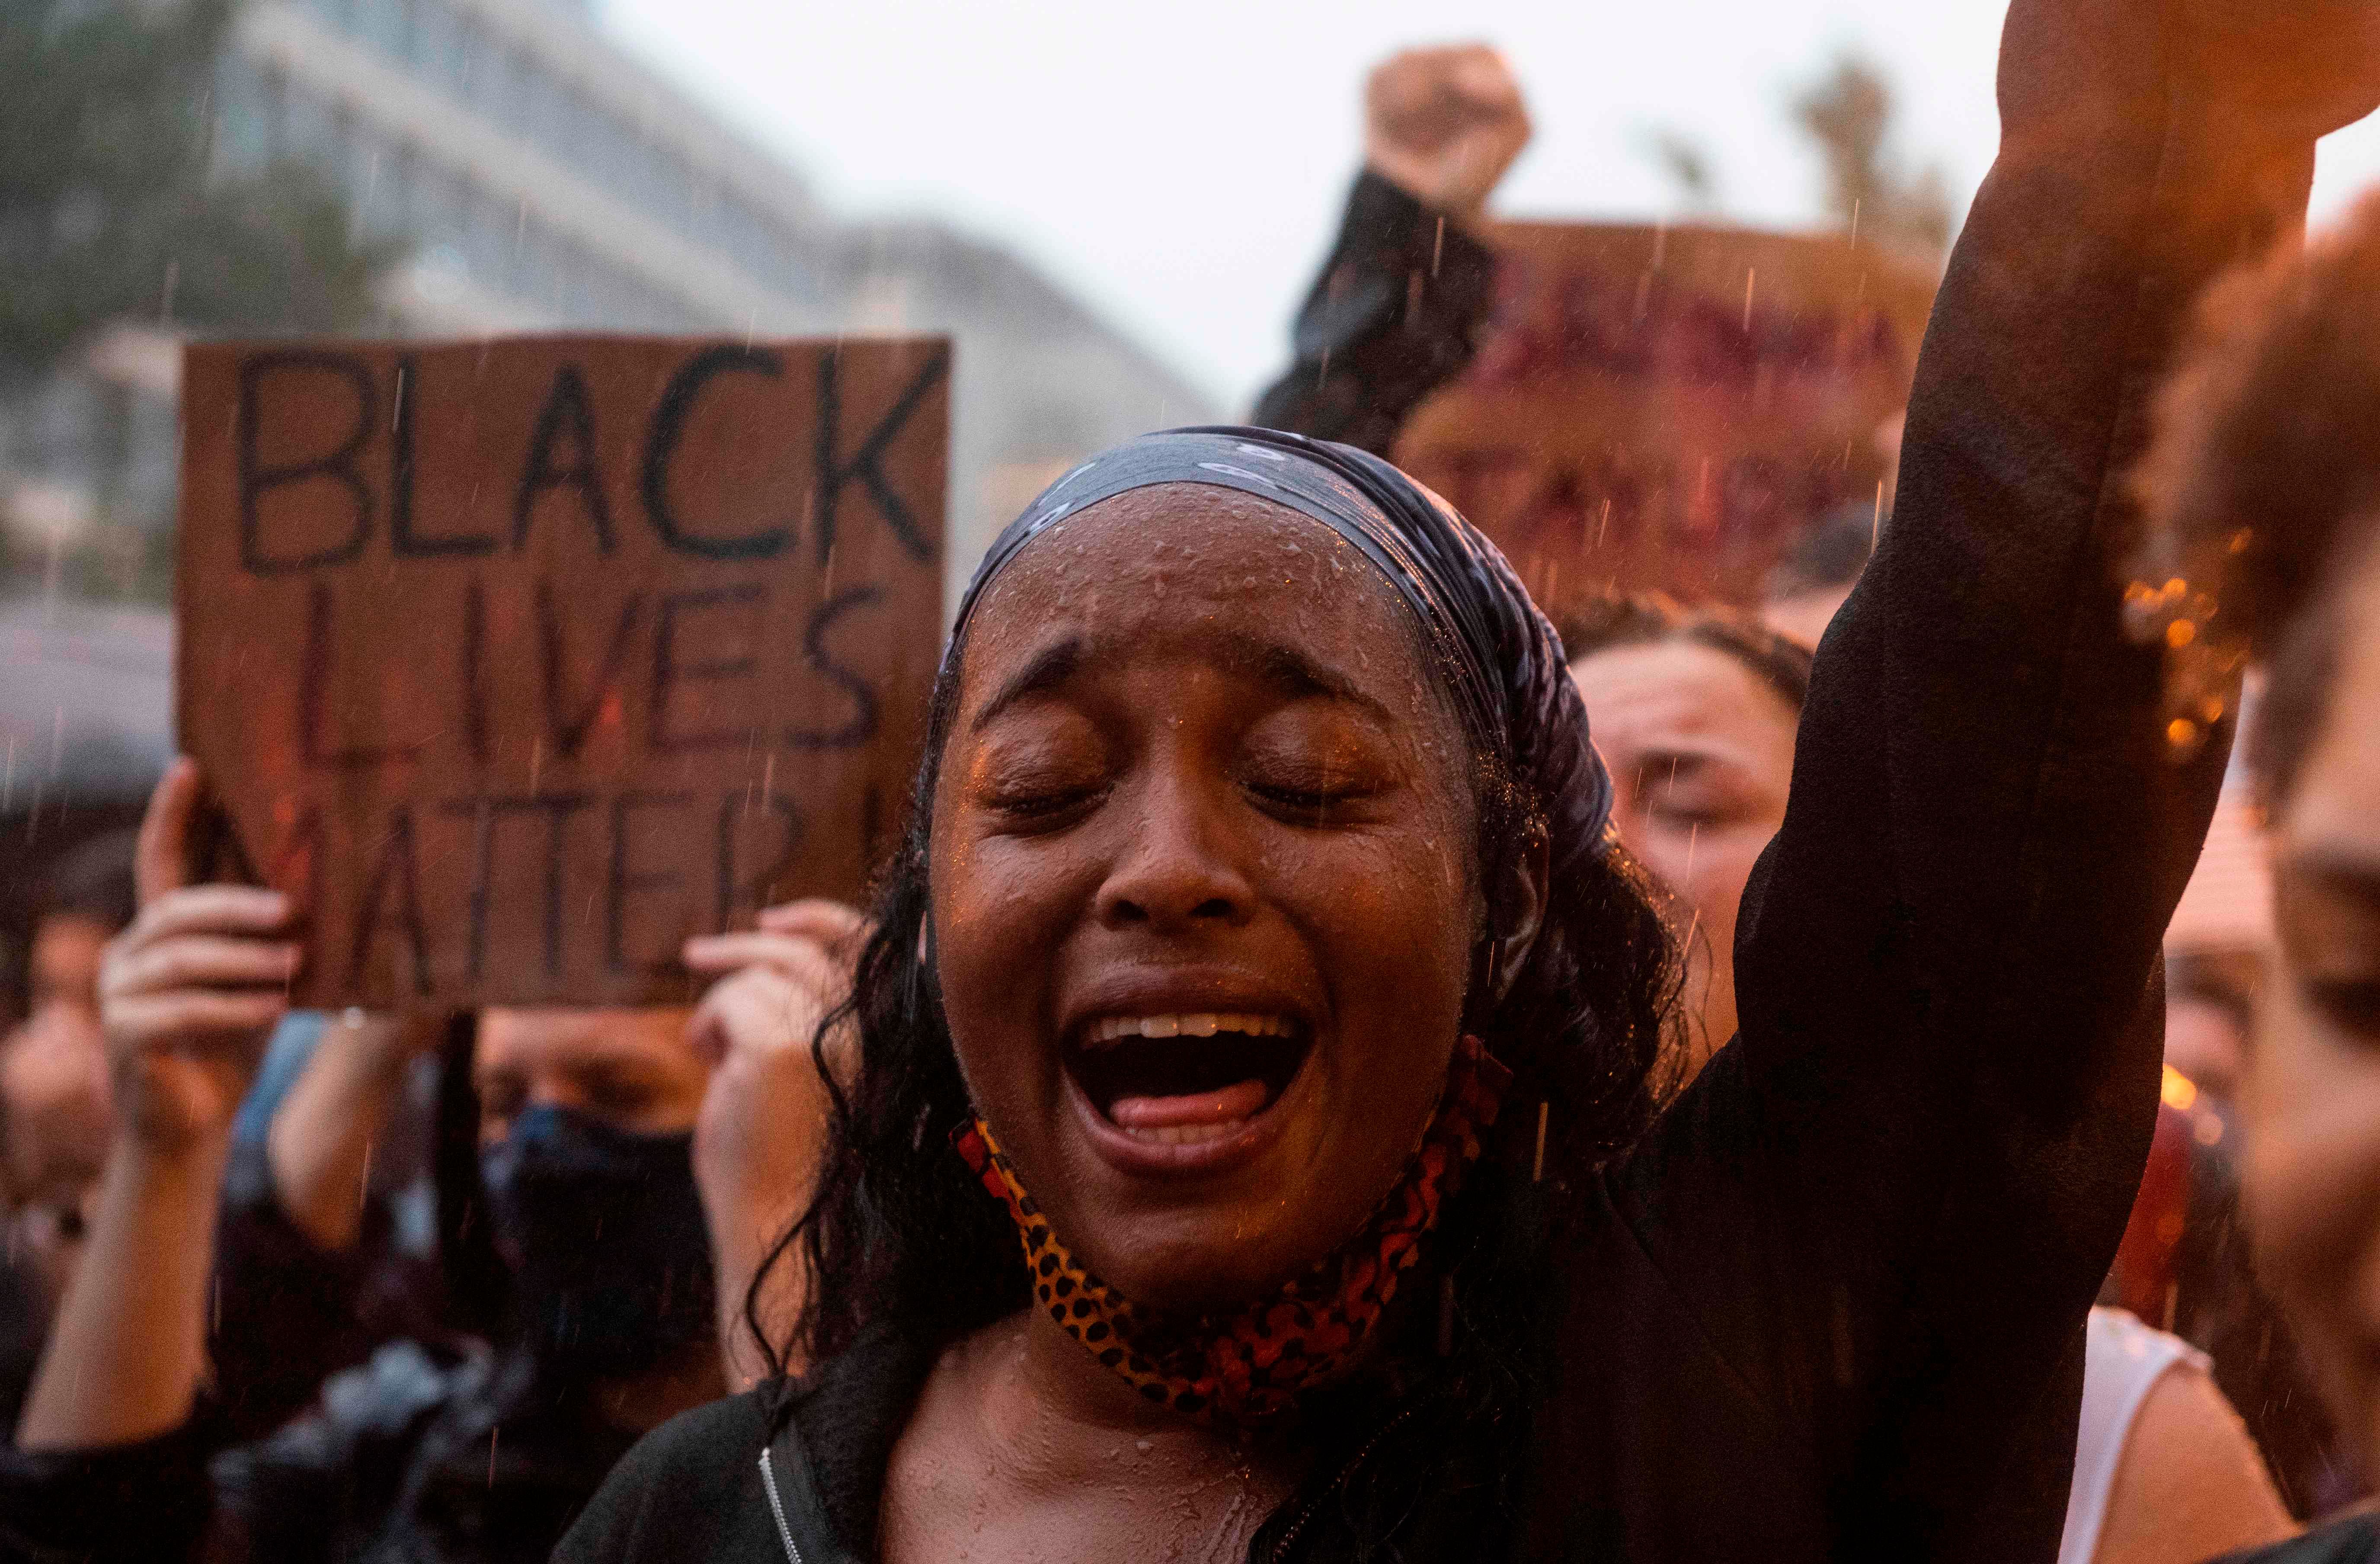 A protester shouts "Black Lives Matter" during a rain storm in front of Lafayette Park next to the White House on June 5, 2020. - Washington mayor Muriel Bowser on June 5 renamed an area near the White House that has become the epicenter of anti-racism protests over the past week "Black Lives Matter Plaza. (AFP Photo)